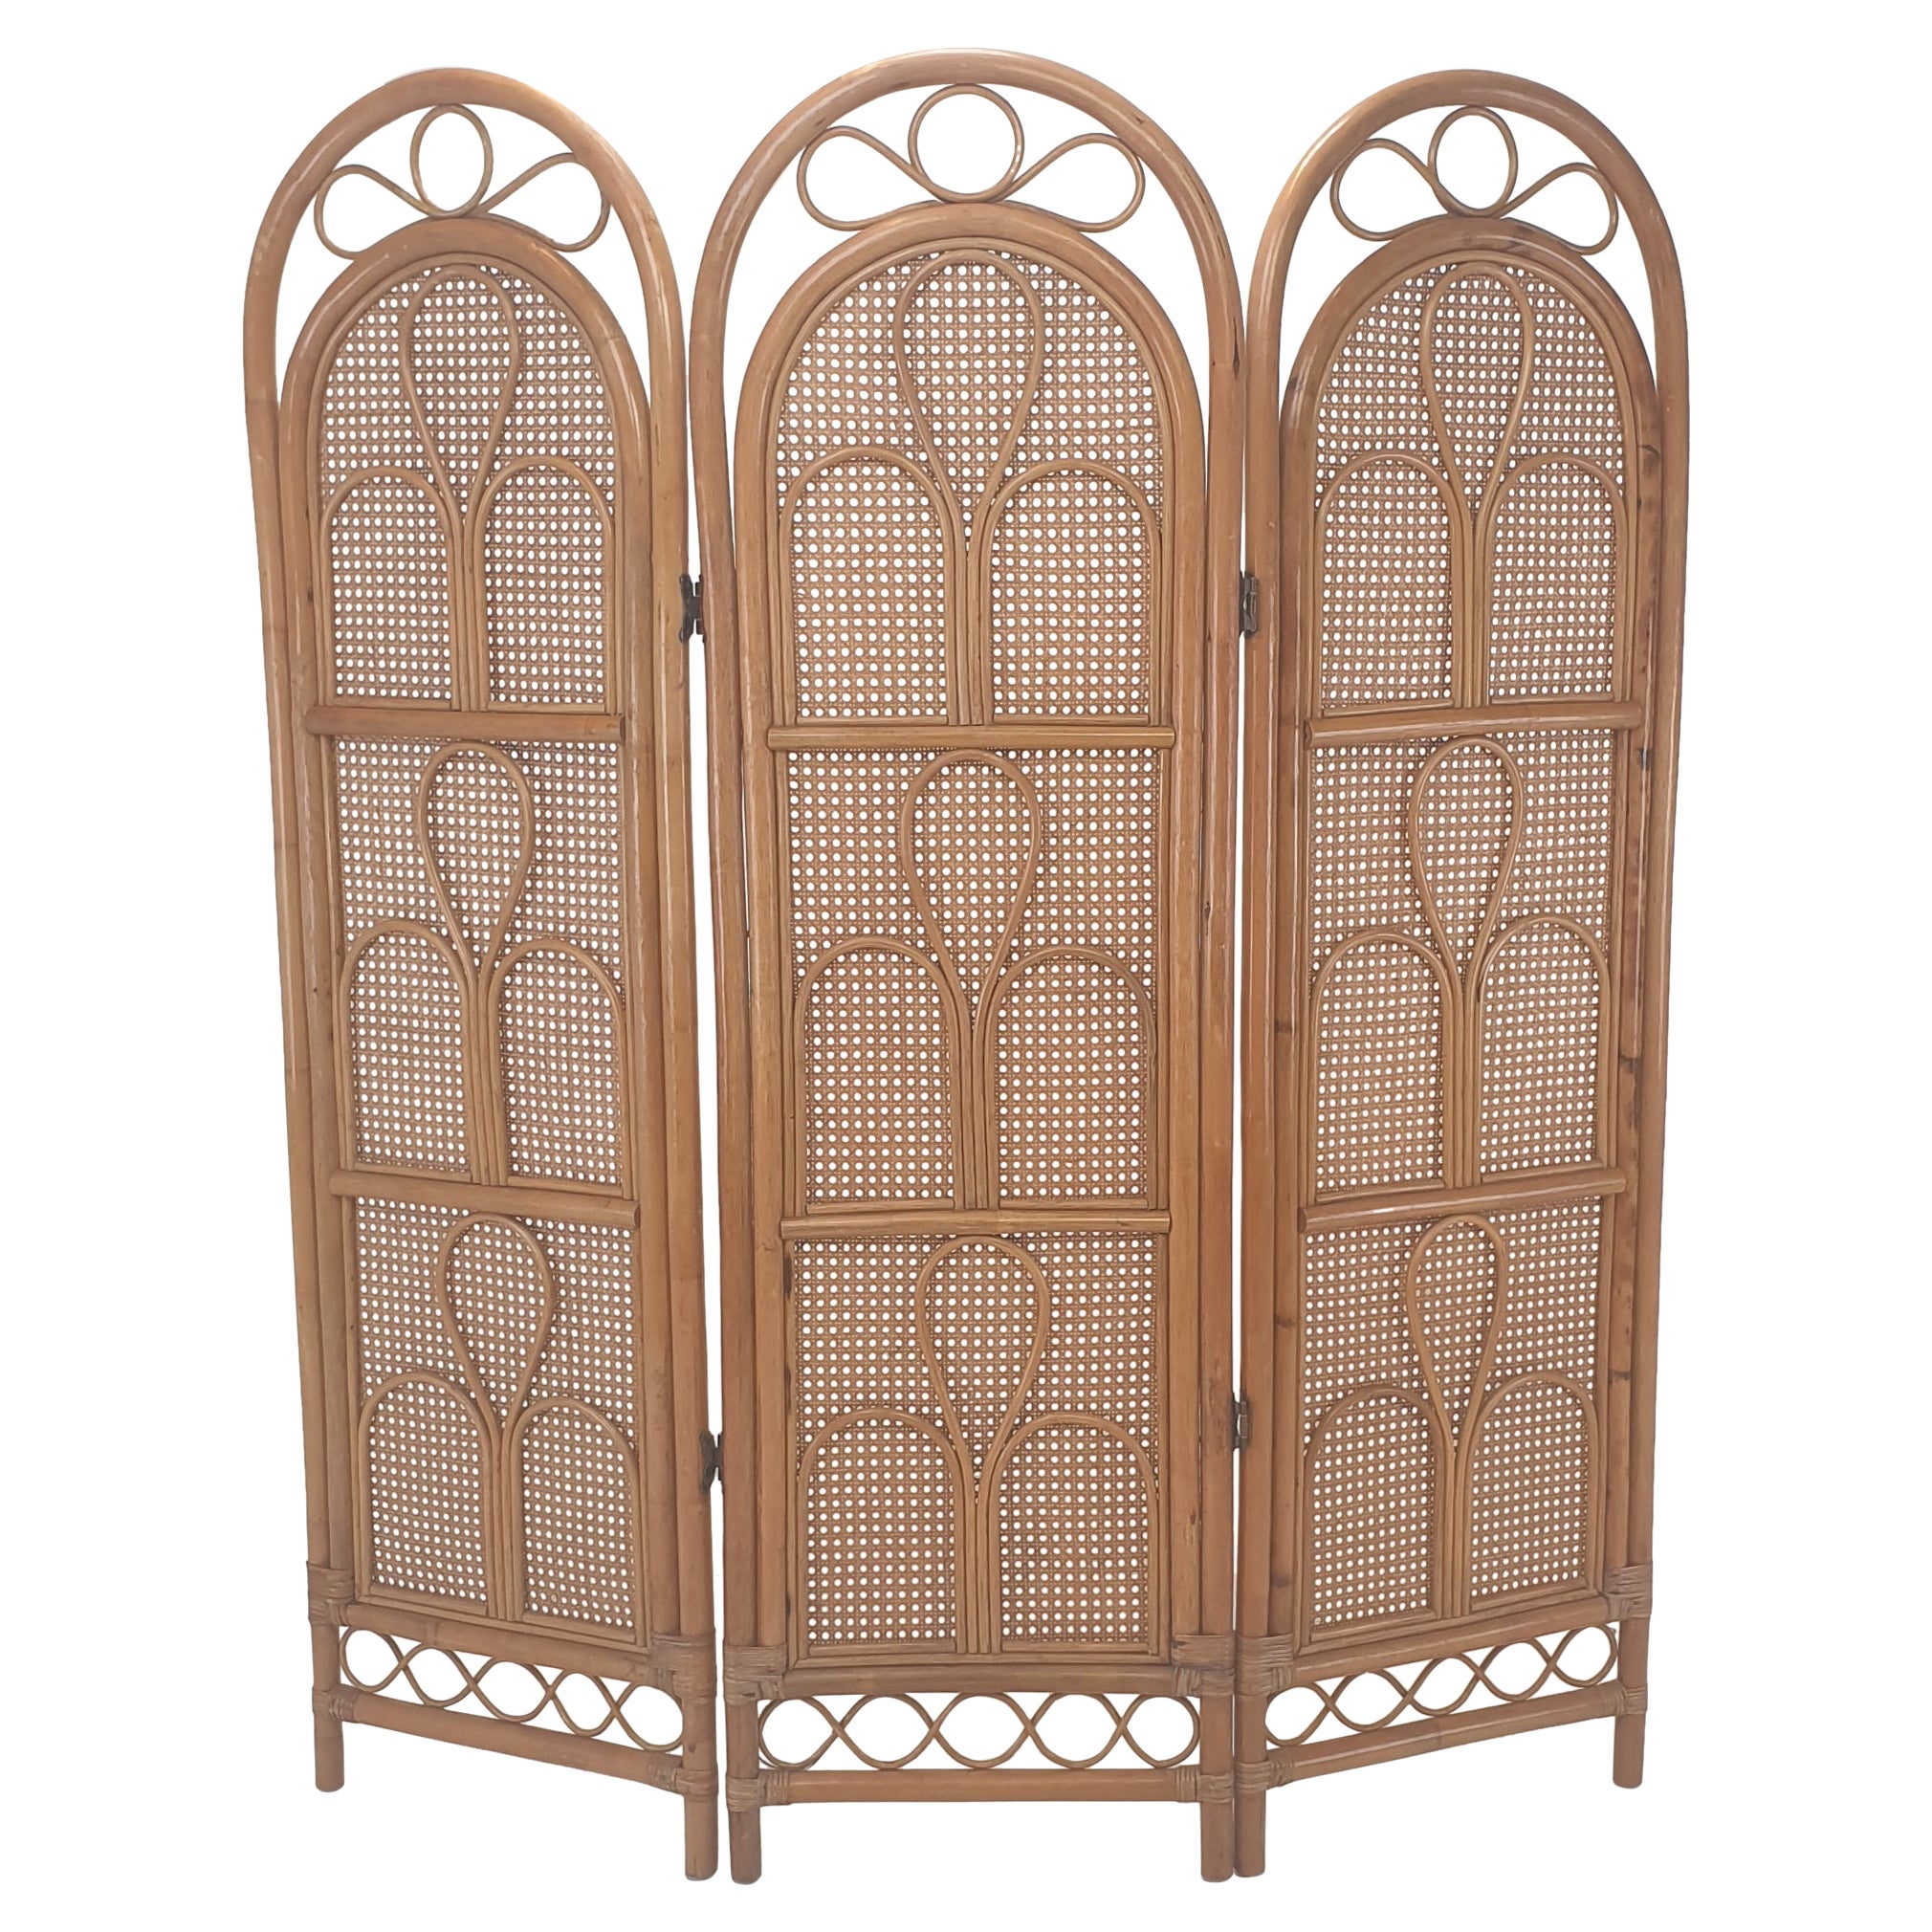 Italian Room Divider in Rattan and Wicker, 1960s For Sale